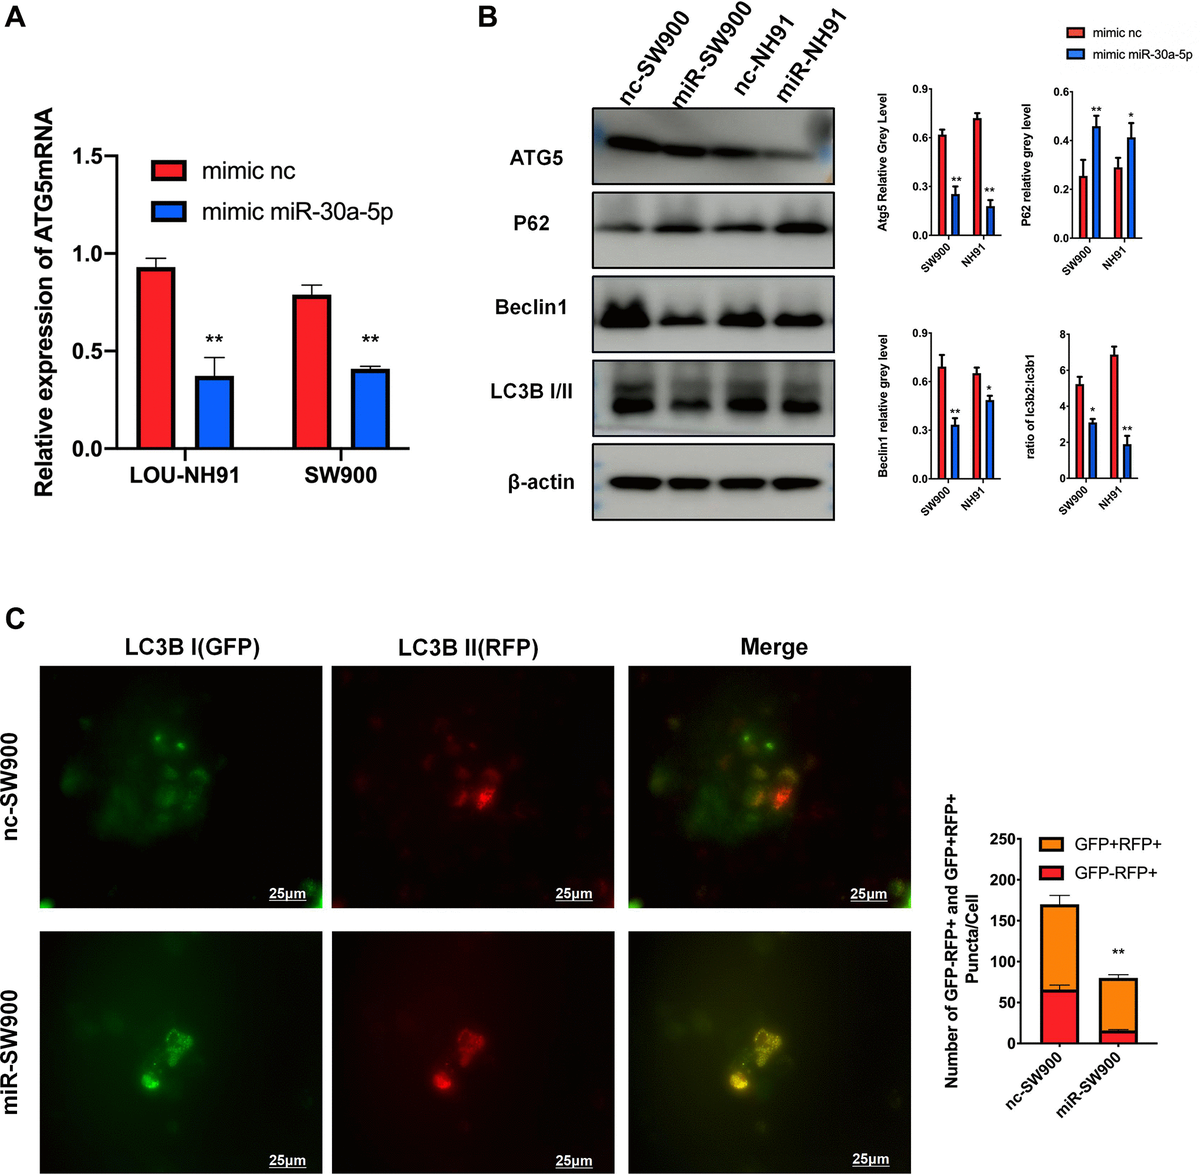 miR-30a-5p suppresses ATG5-mediated autophagy in LUSC. (A) The result of mRNA were used to evaluate the effect of miR-30a-5p on ATG5. (B) SW900 and NH91 cells were transfected with mimic NC or mimic miR-30a-5p and then starved for 2 hours to stimulate autophagy. ATG5, P62, Beclin 1, and LC3B I/II expression were evaluated by western blot. (C) GFP-mRFP-LC3 lentivirus was used to evaluate autophagy flux in mimic NC/miR transfected SW900 cells. Red or yellow puncta indicating complete/incomplete autophagy were calculated and reported as the mean ± SD. All the P values were compared with the control *P **P ***P 